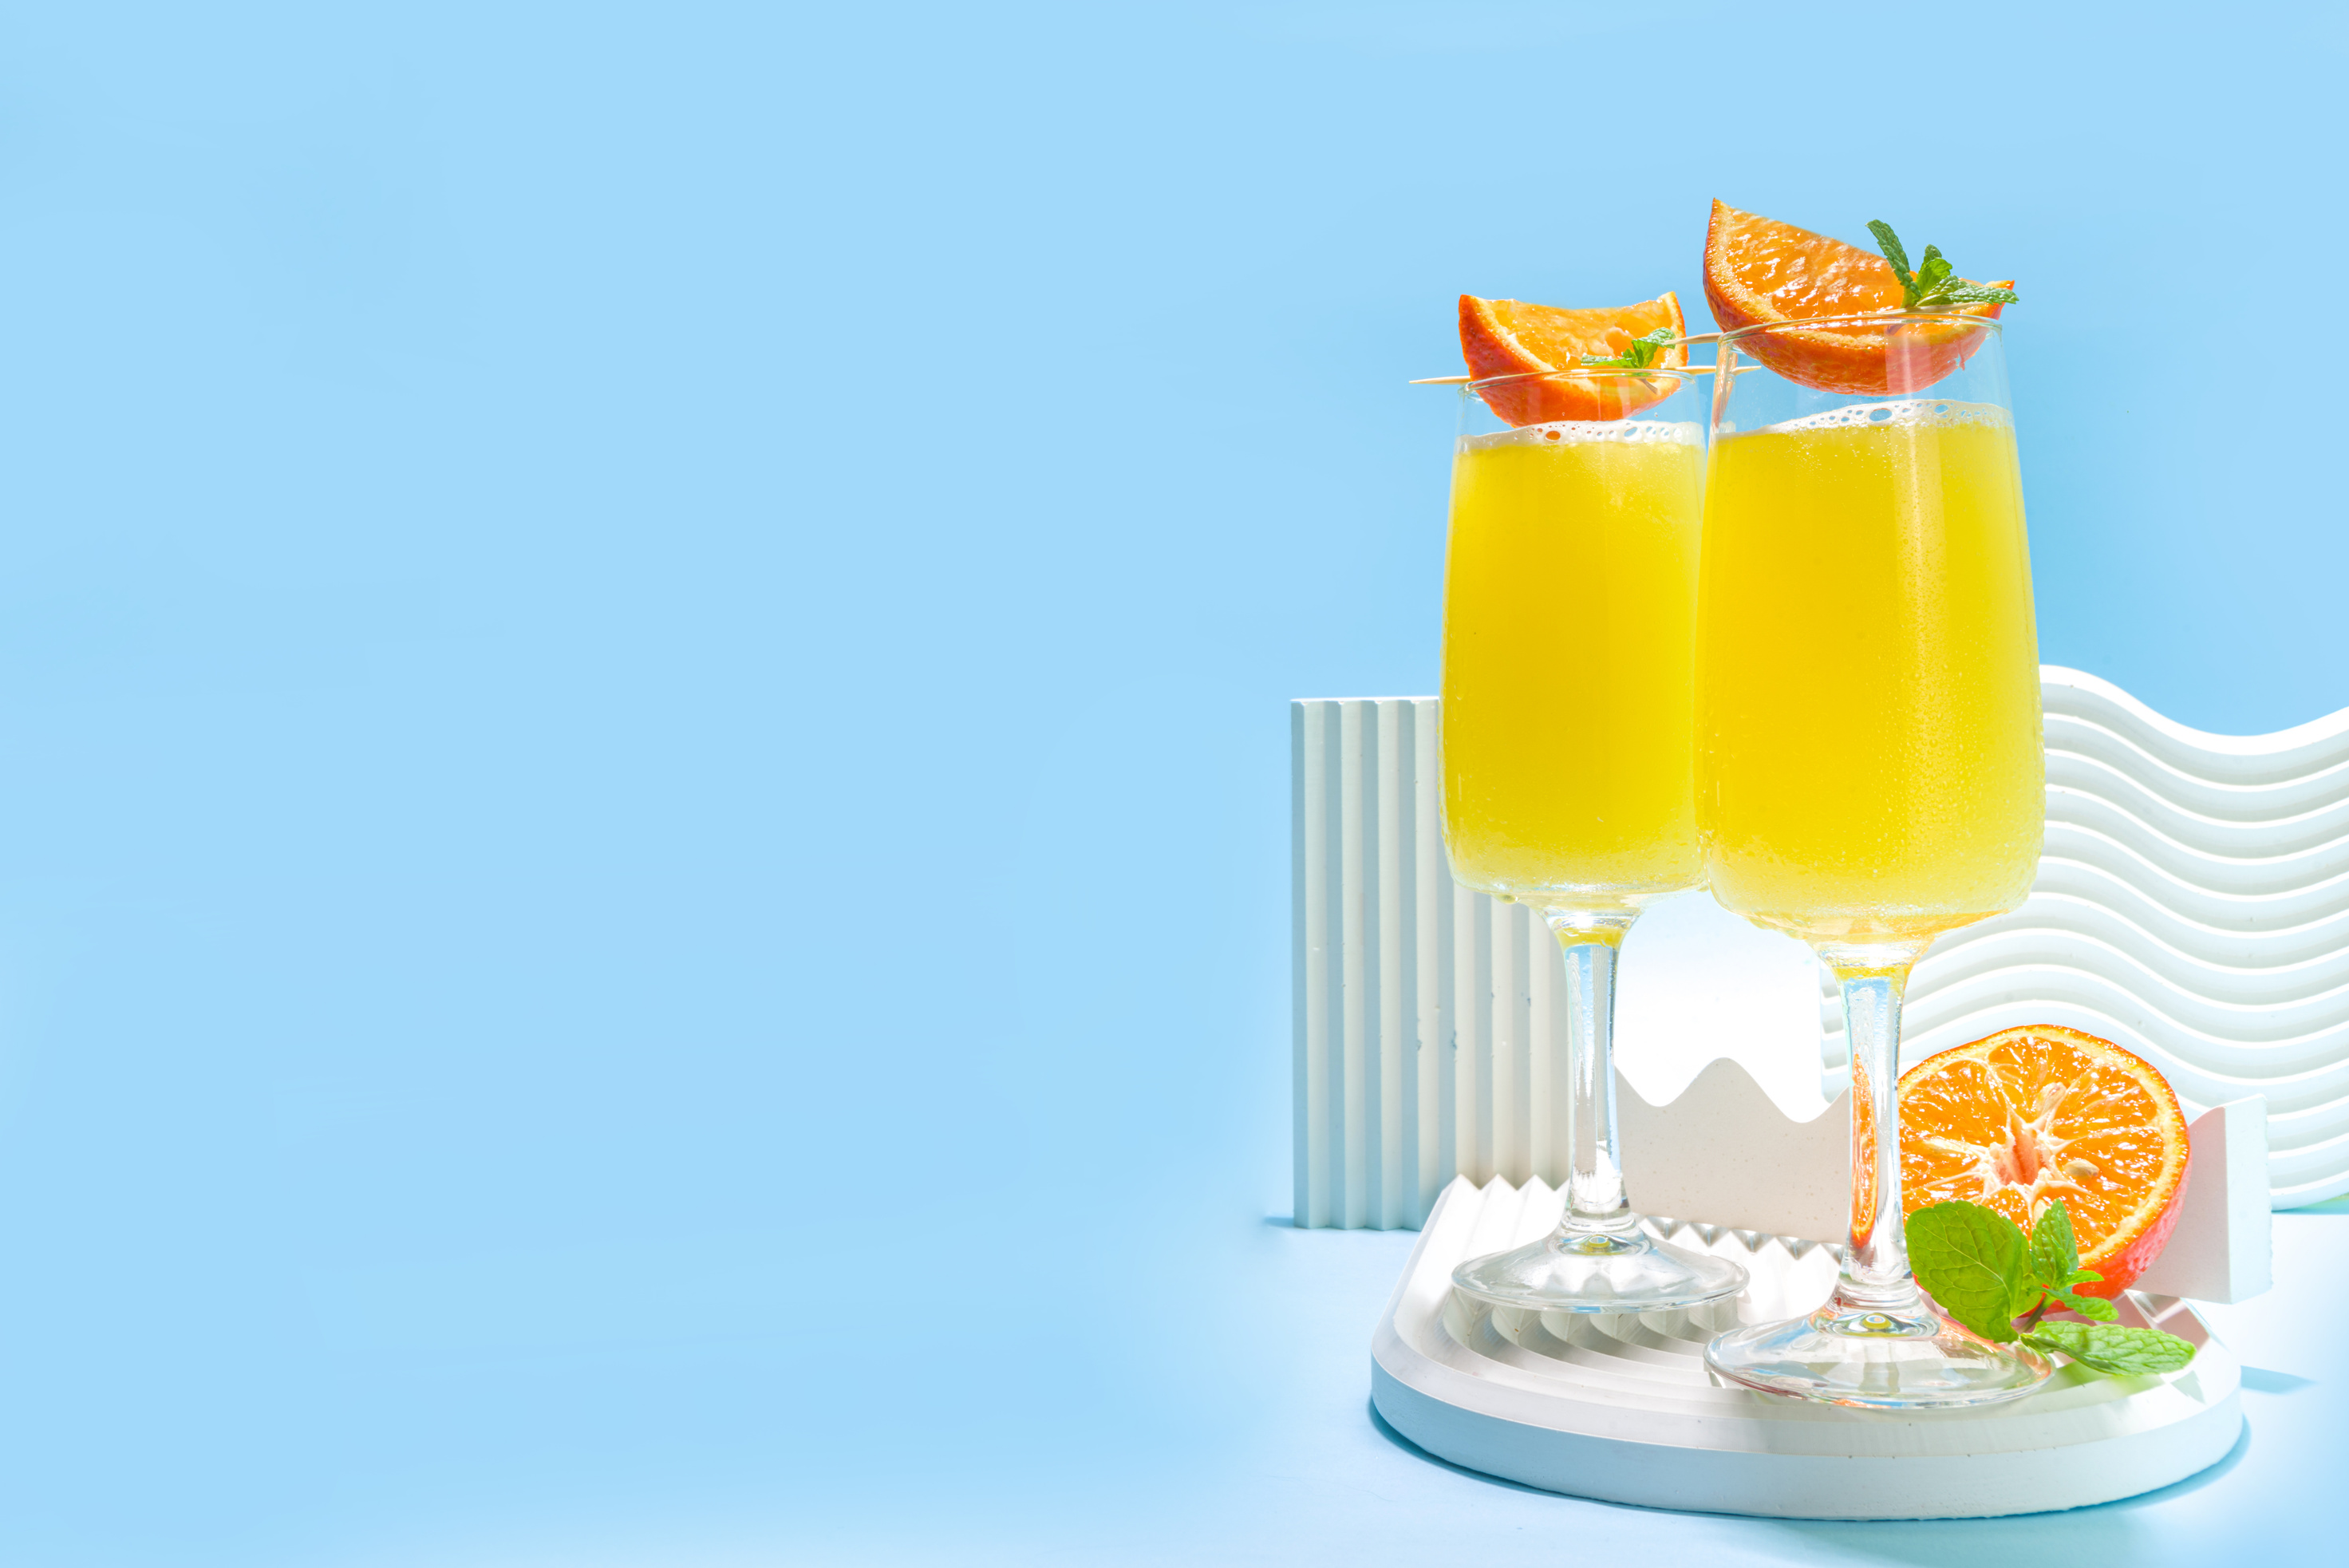 Classic summer mimosas cocktail, with orange juice